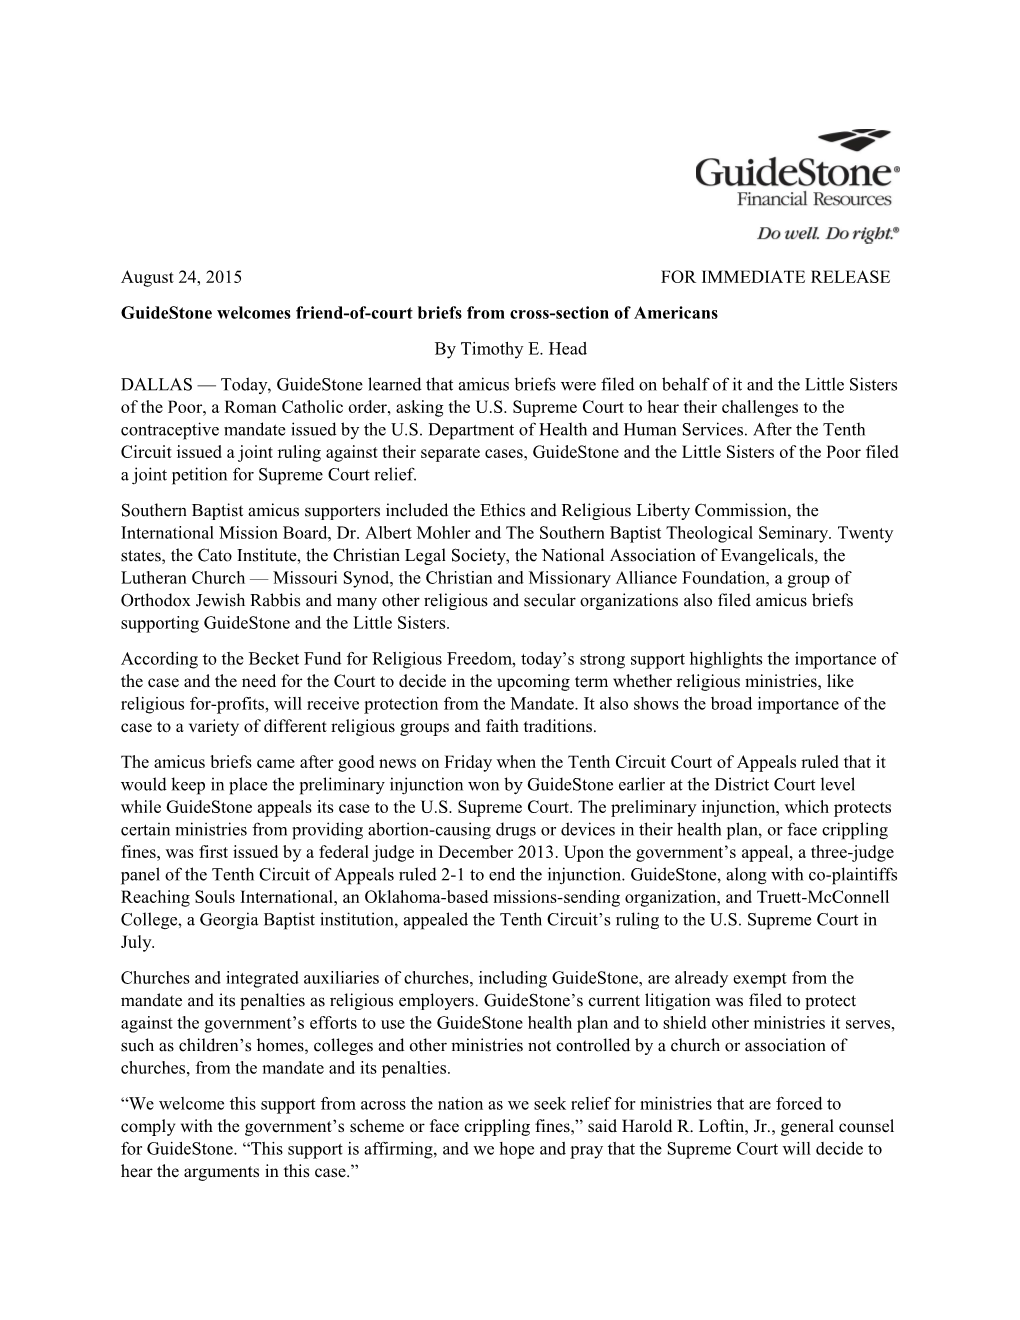 Guidestone Welcomes Friend-Of-Court Briefs from Cross-Section of Americans